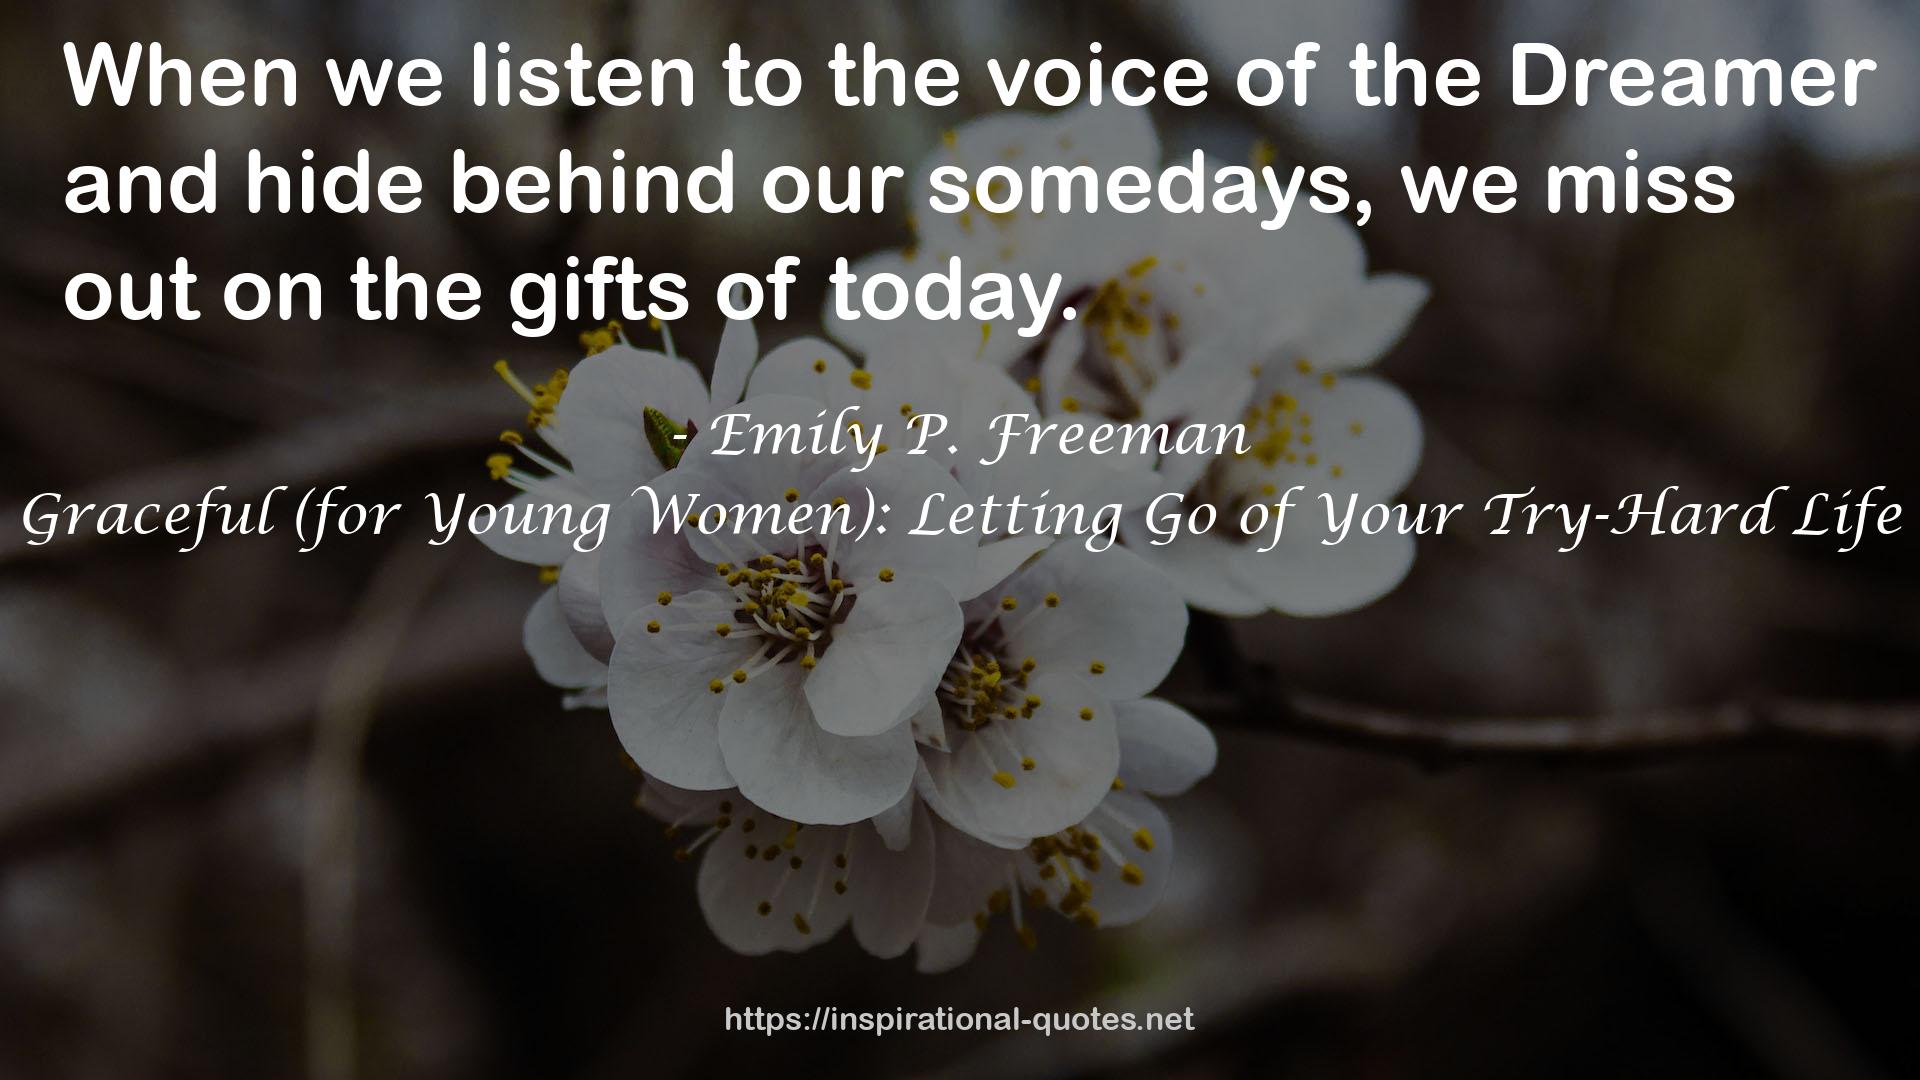 Graceful (for Young Women): Letting Go of Your Try-Hard Life QUOTES